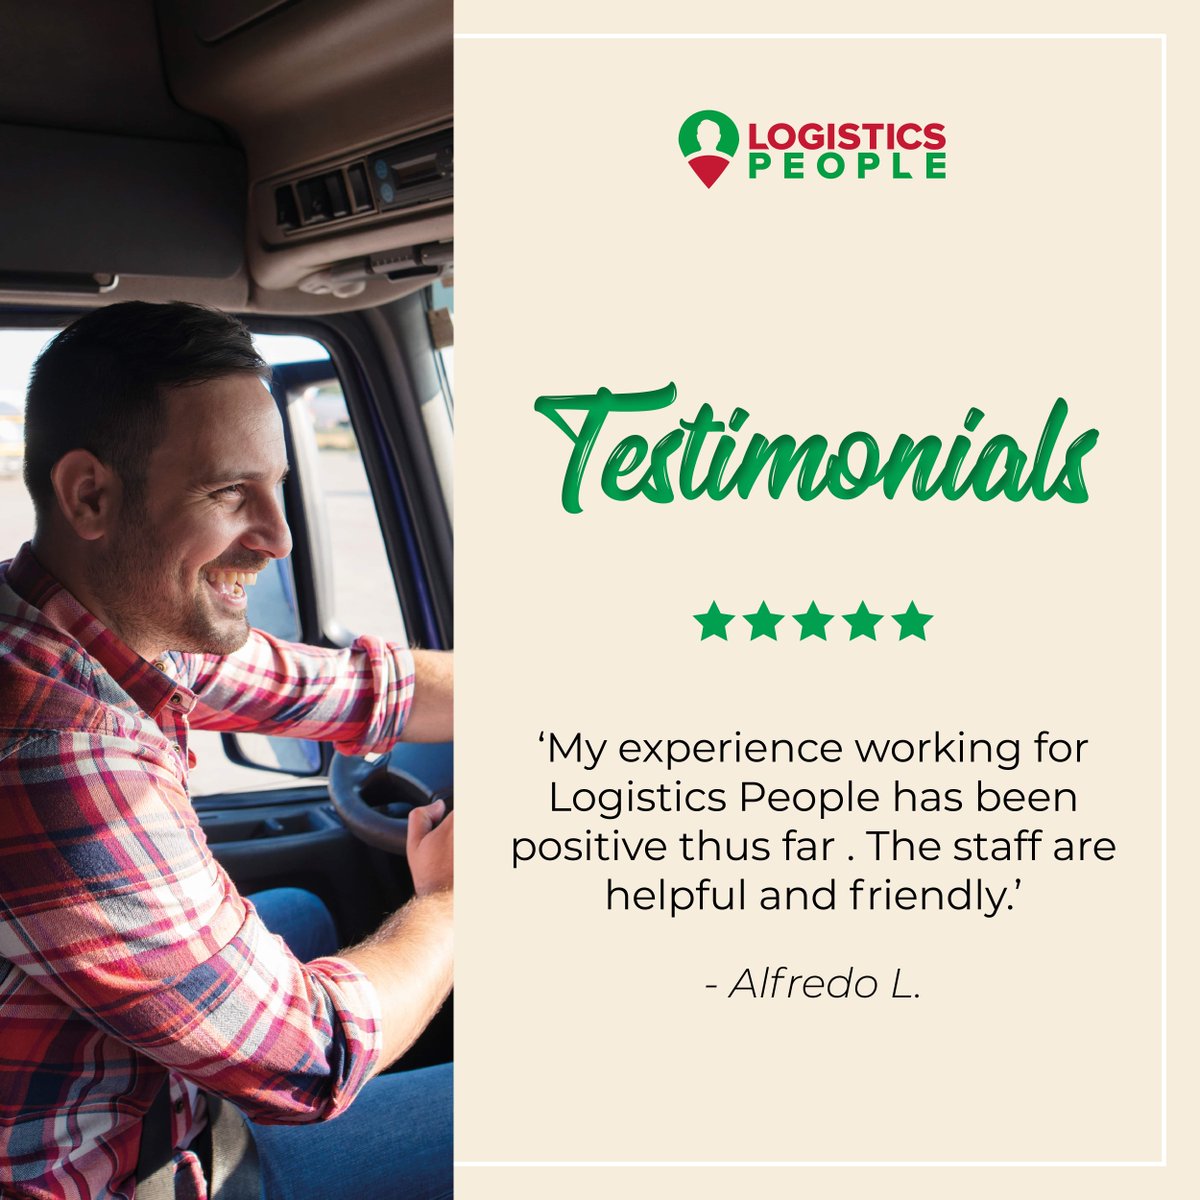 ⭐ RAVING REVIEWS ⭐

️Find out for yourself why we are the UK's leading logistics recruitment agency! 🙌

#Review #Testimonial #EmployeeReview #TeamLP #Logistics #LogisticsPeople